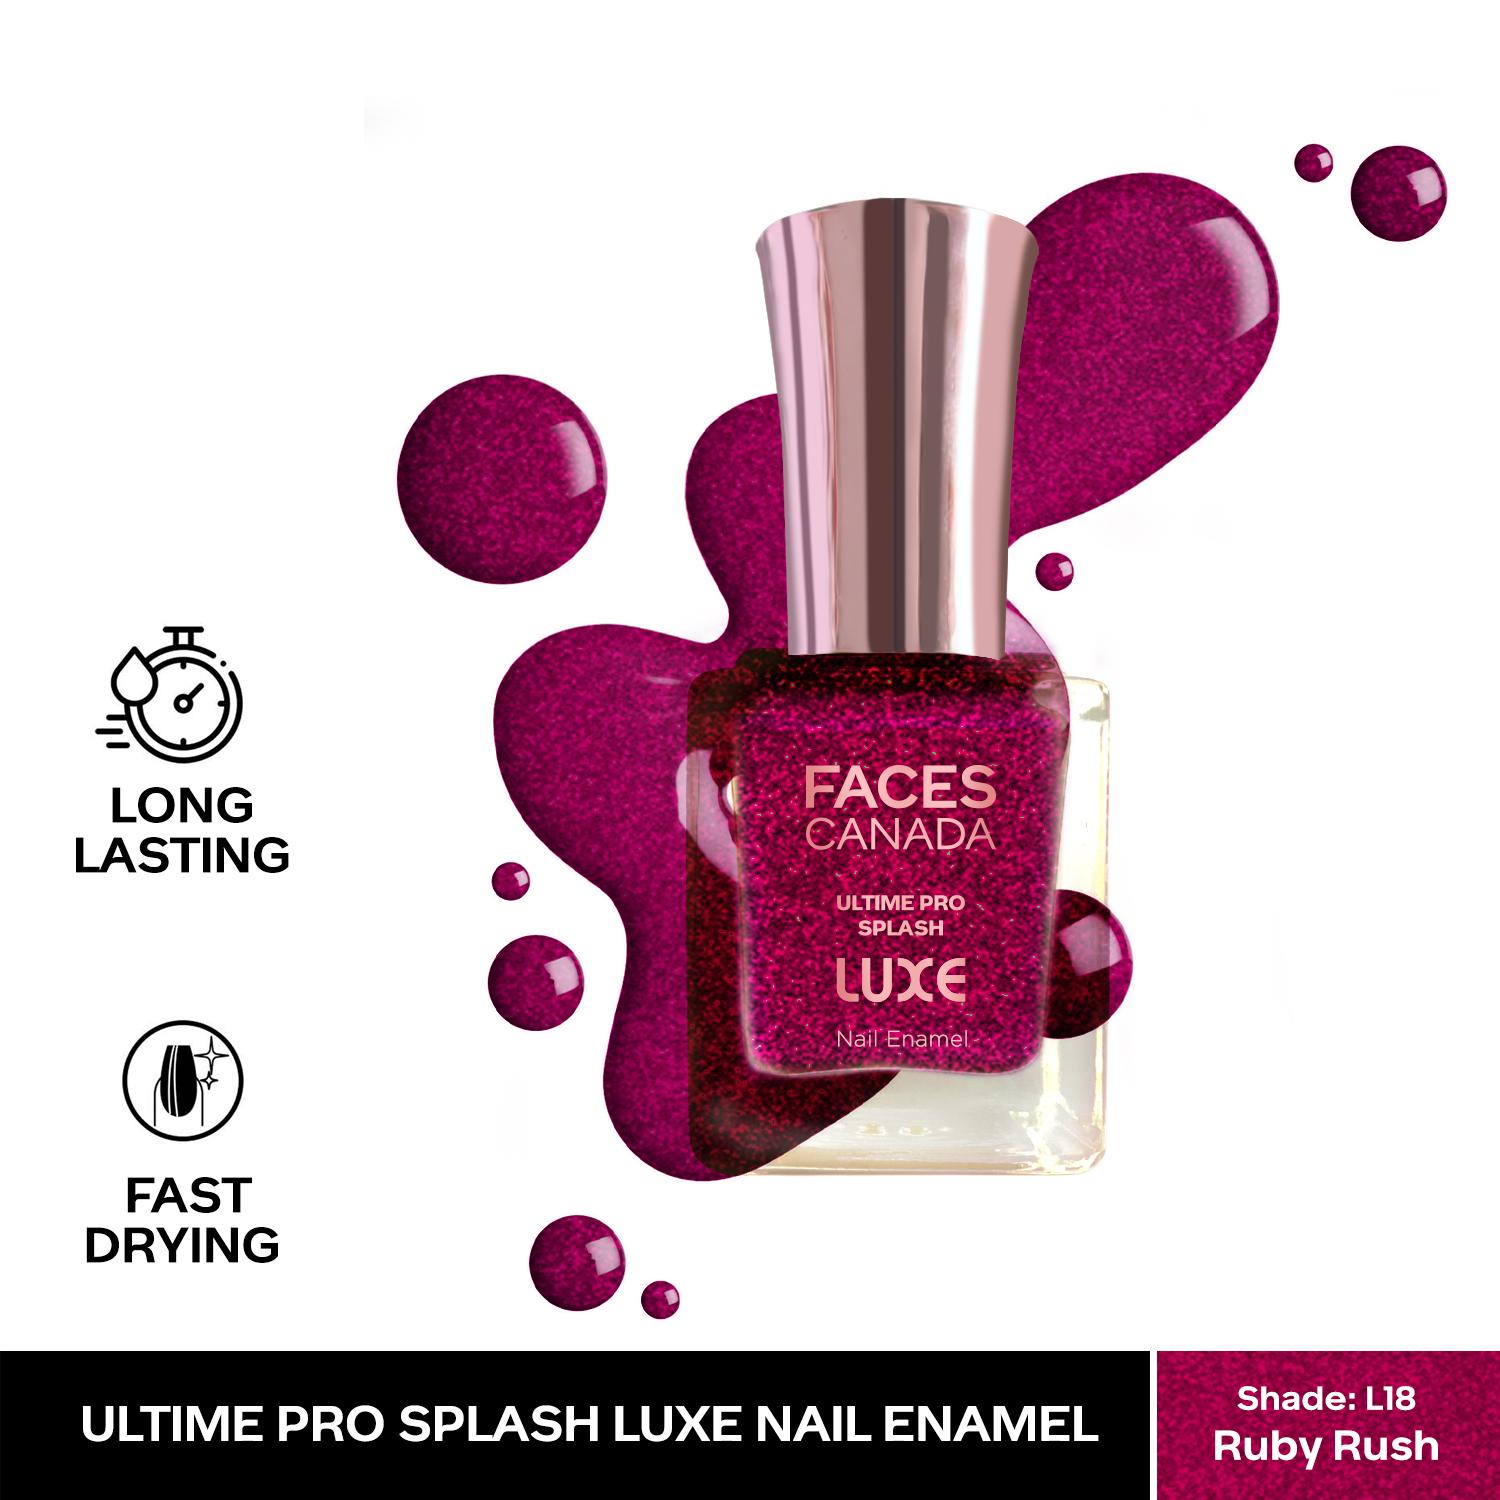 Faces Canada | Faces Canada Ultime Pro Splash Luxe Nail Enamel - Ruby Rush (L18), Glossy Finish (12 ml)